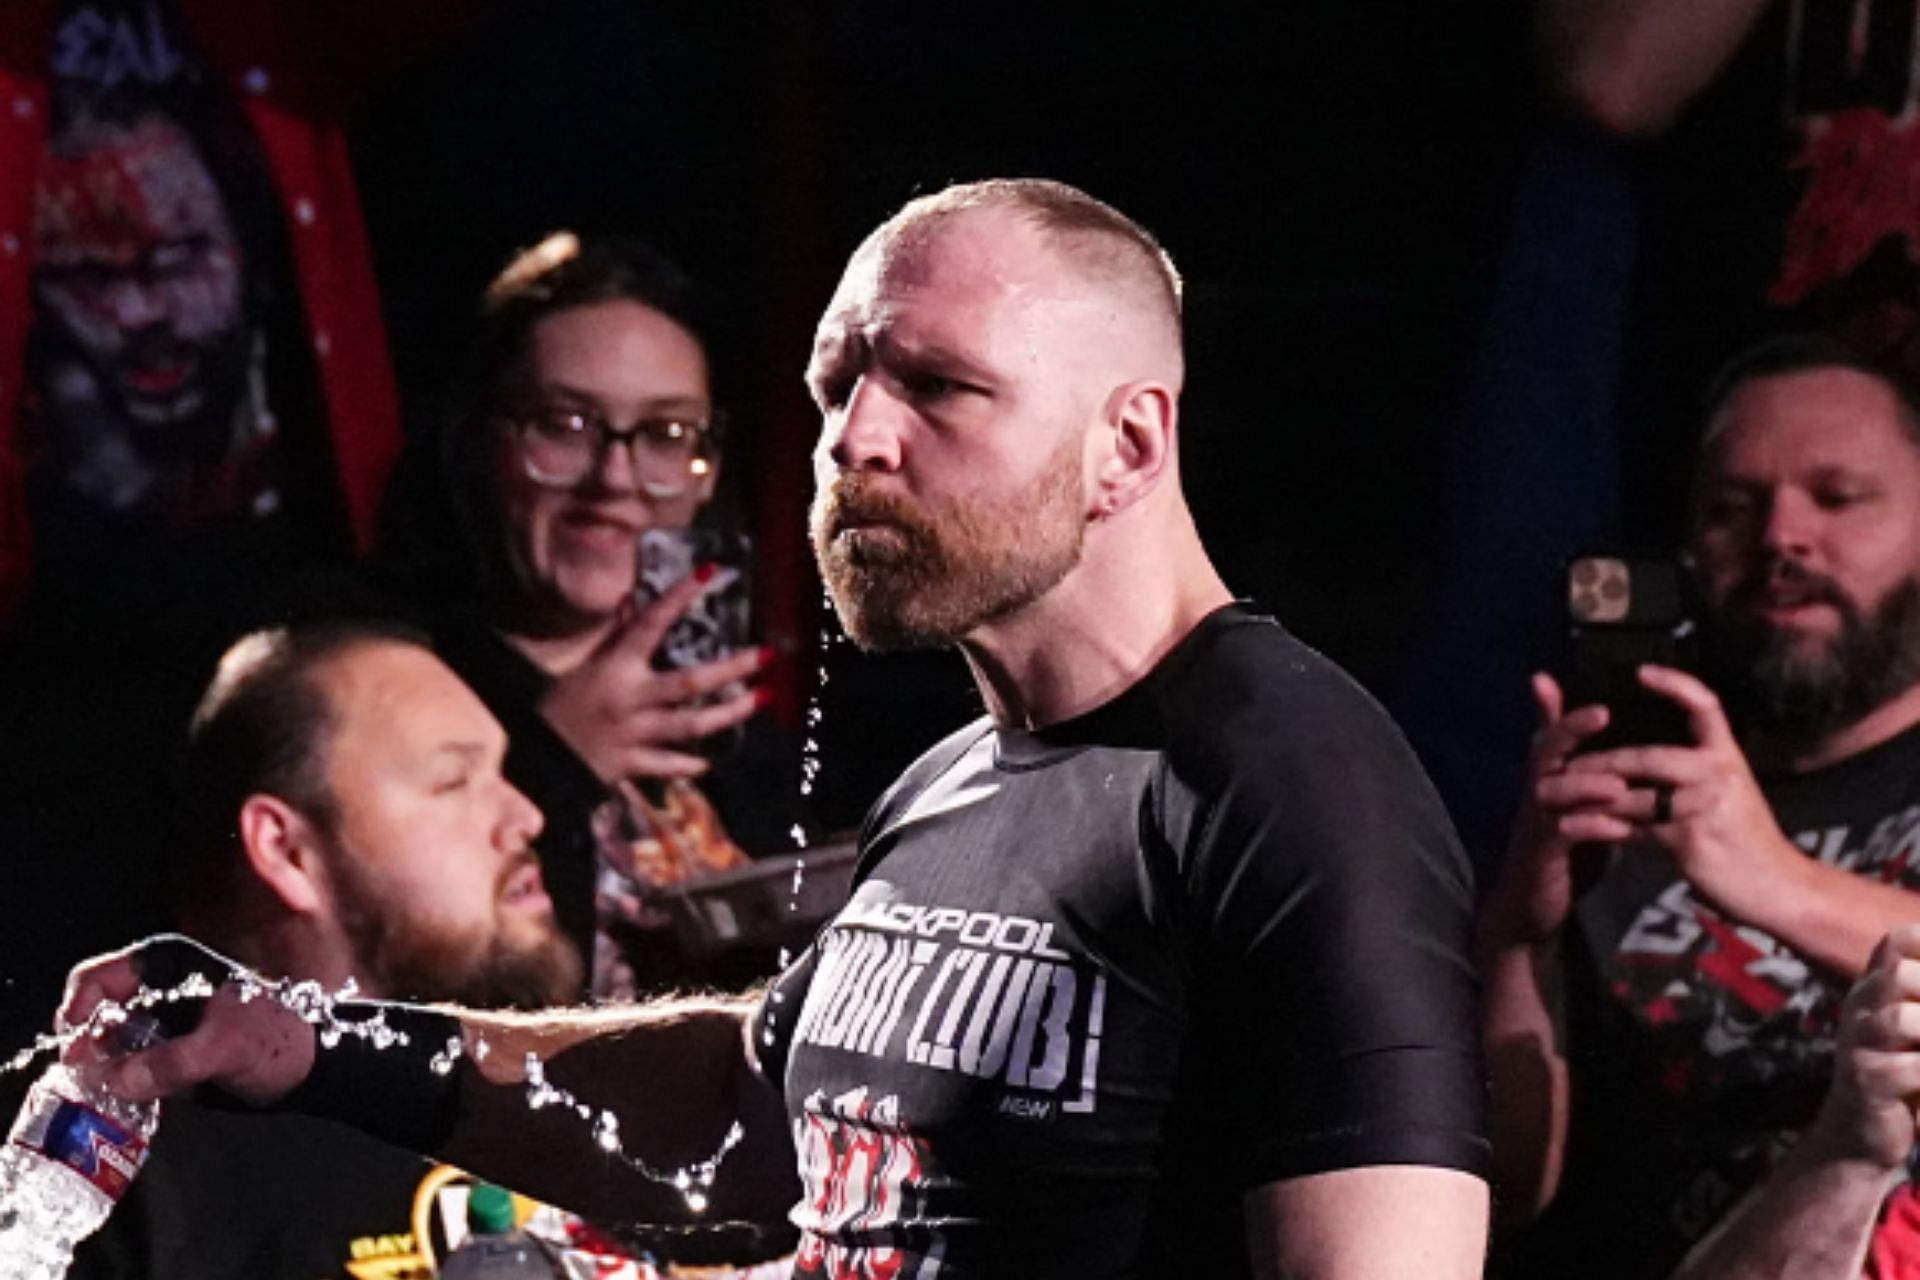 Things could be very different for Jon Moxley if Heath Slater had his way [Image Credits: AEW Instagram]